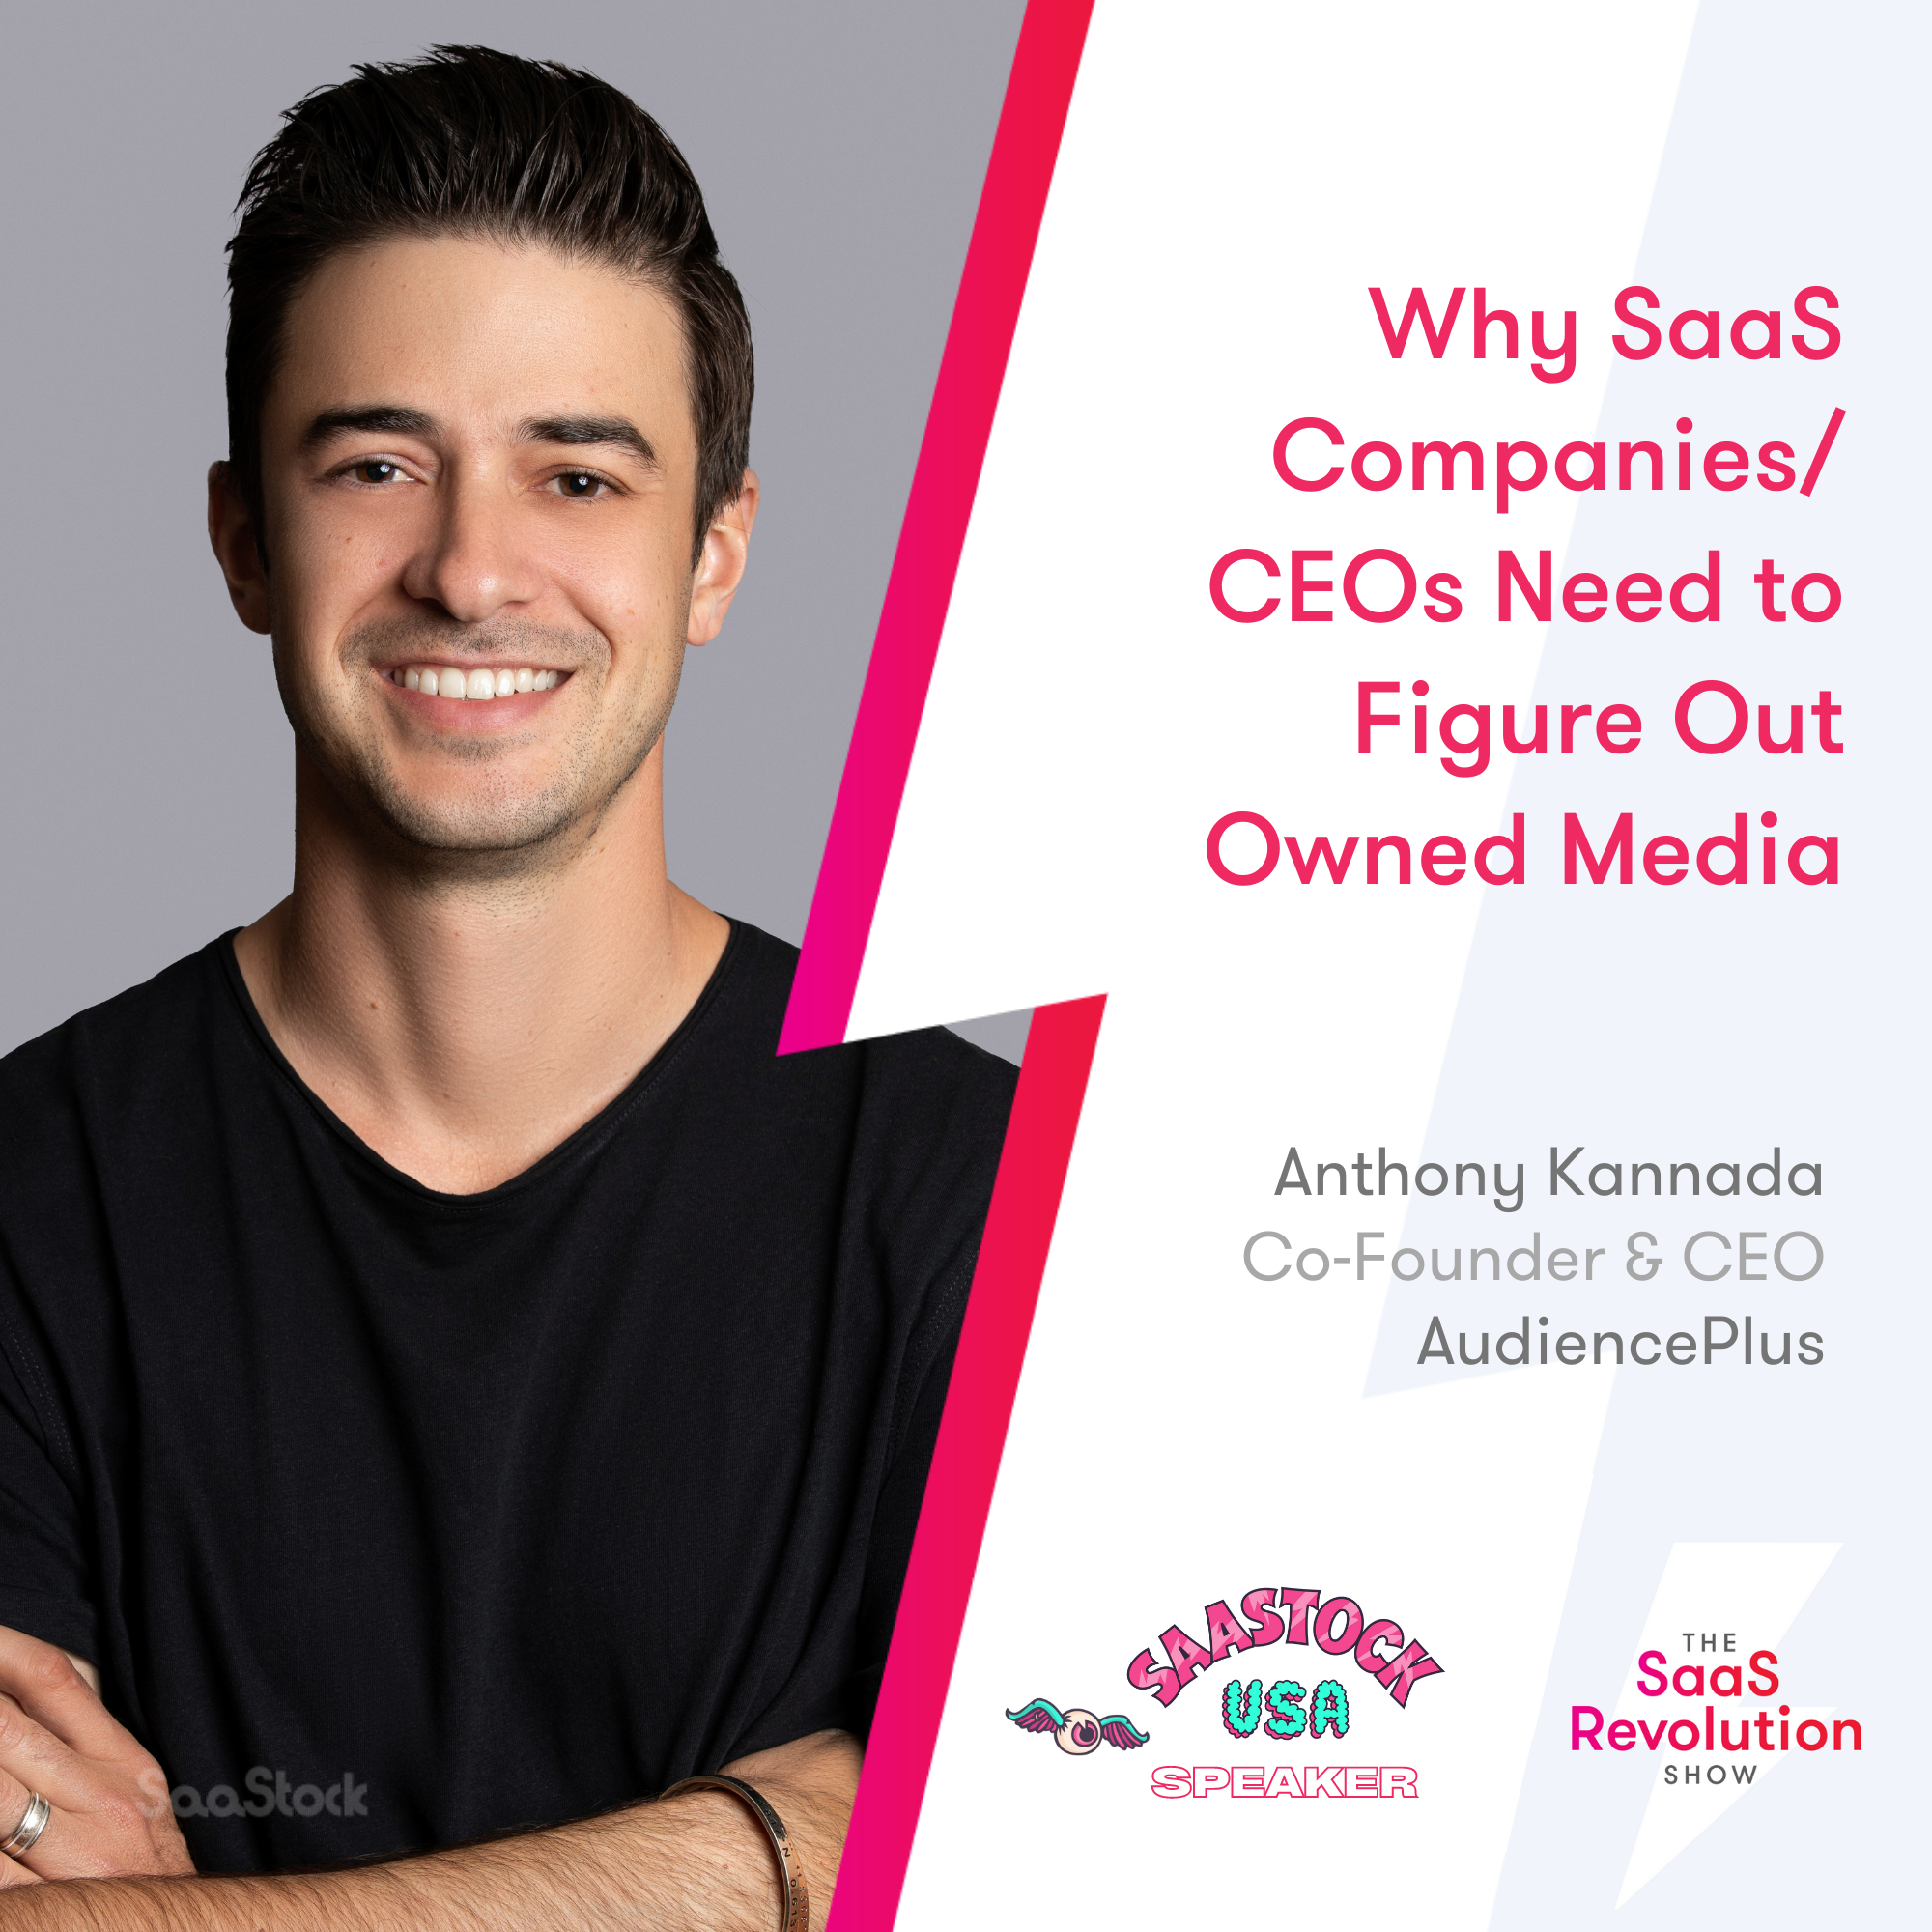 Why SaaS Companies/ CEOs Need to Figure Out Owned Media